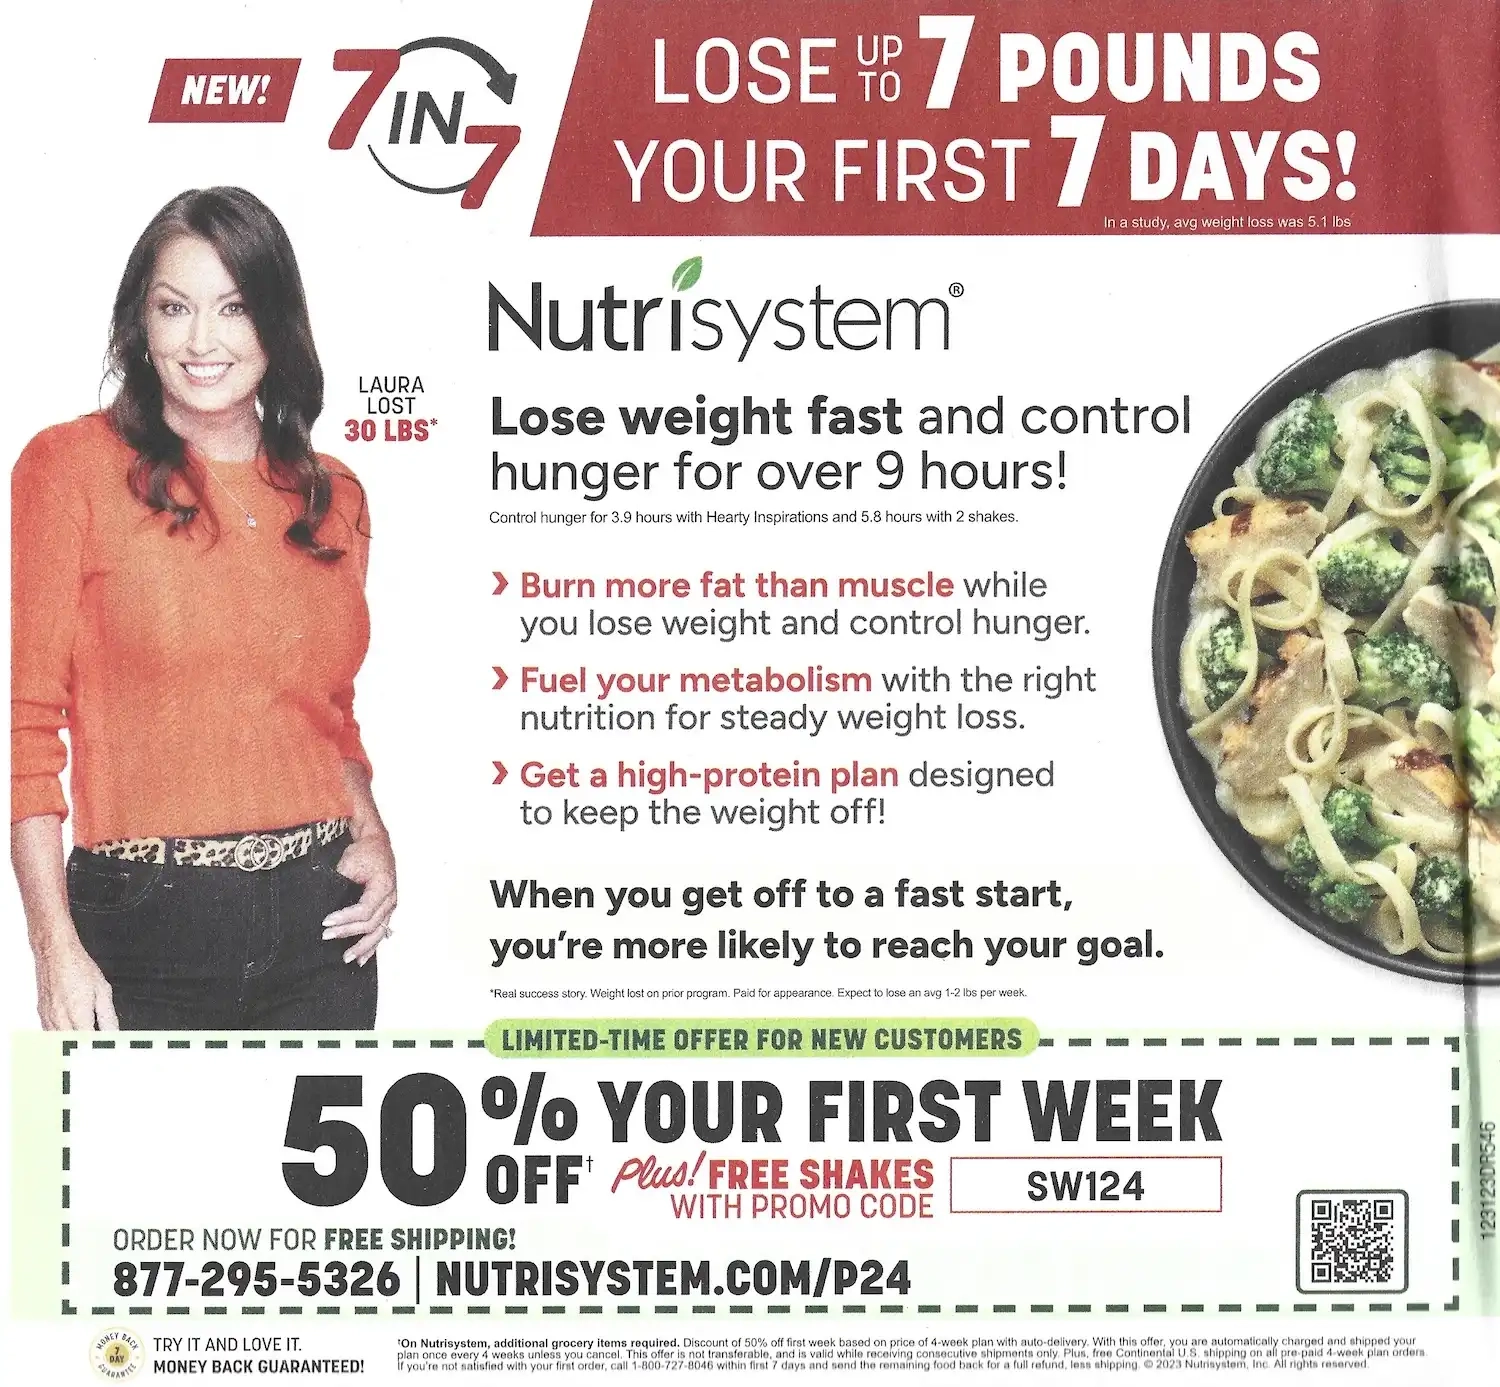 Nutrisystem 50% Off First Week + Free Shakes Promotion